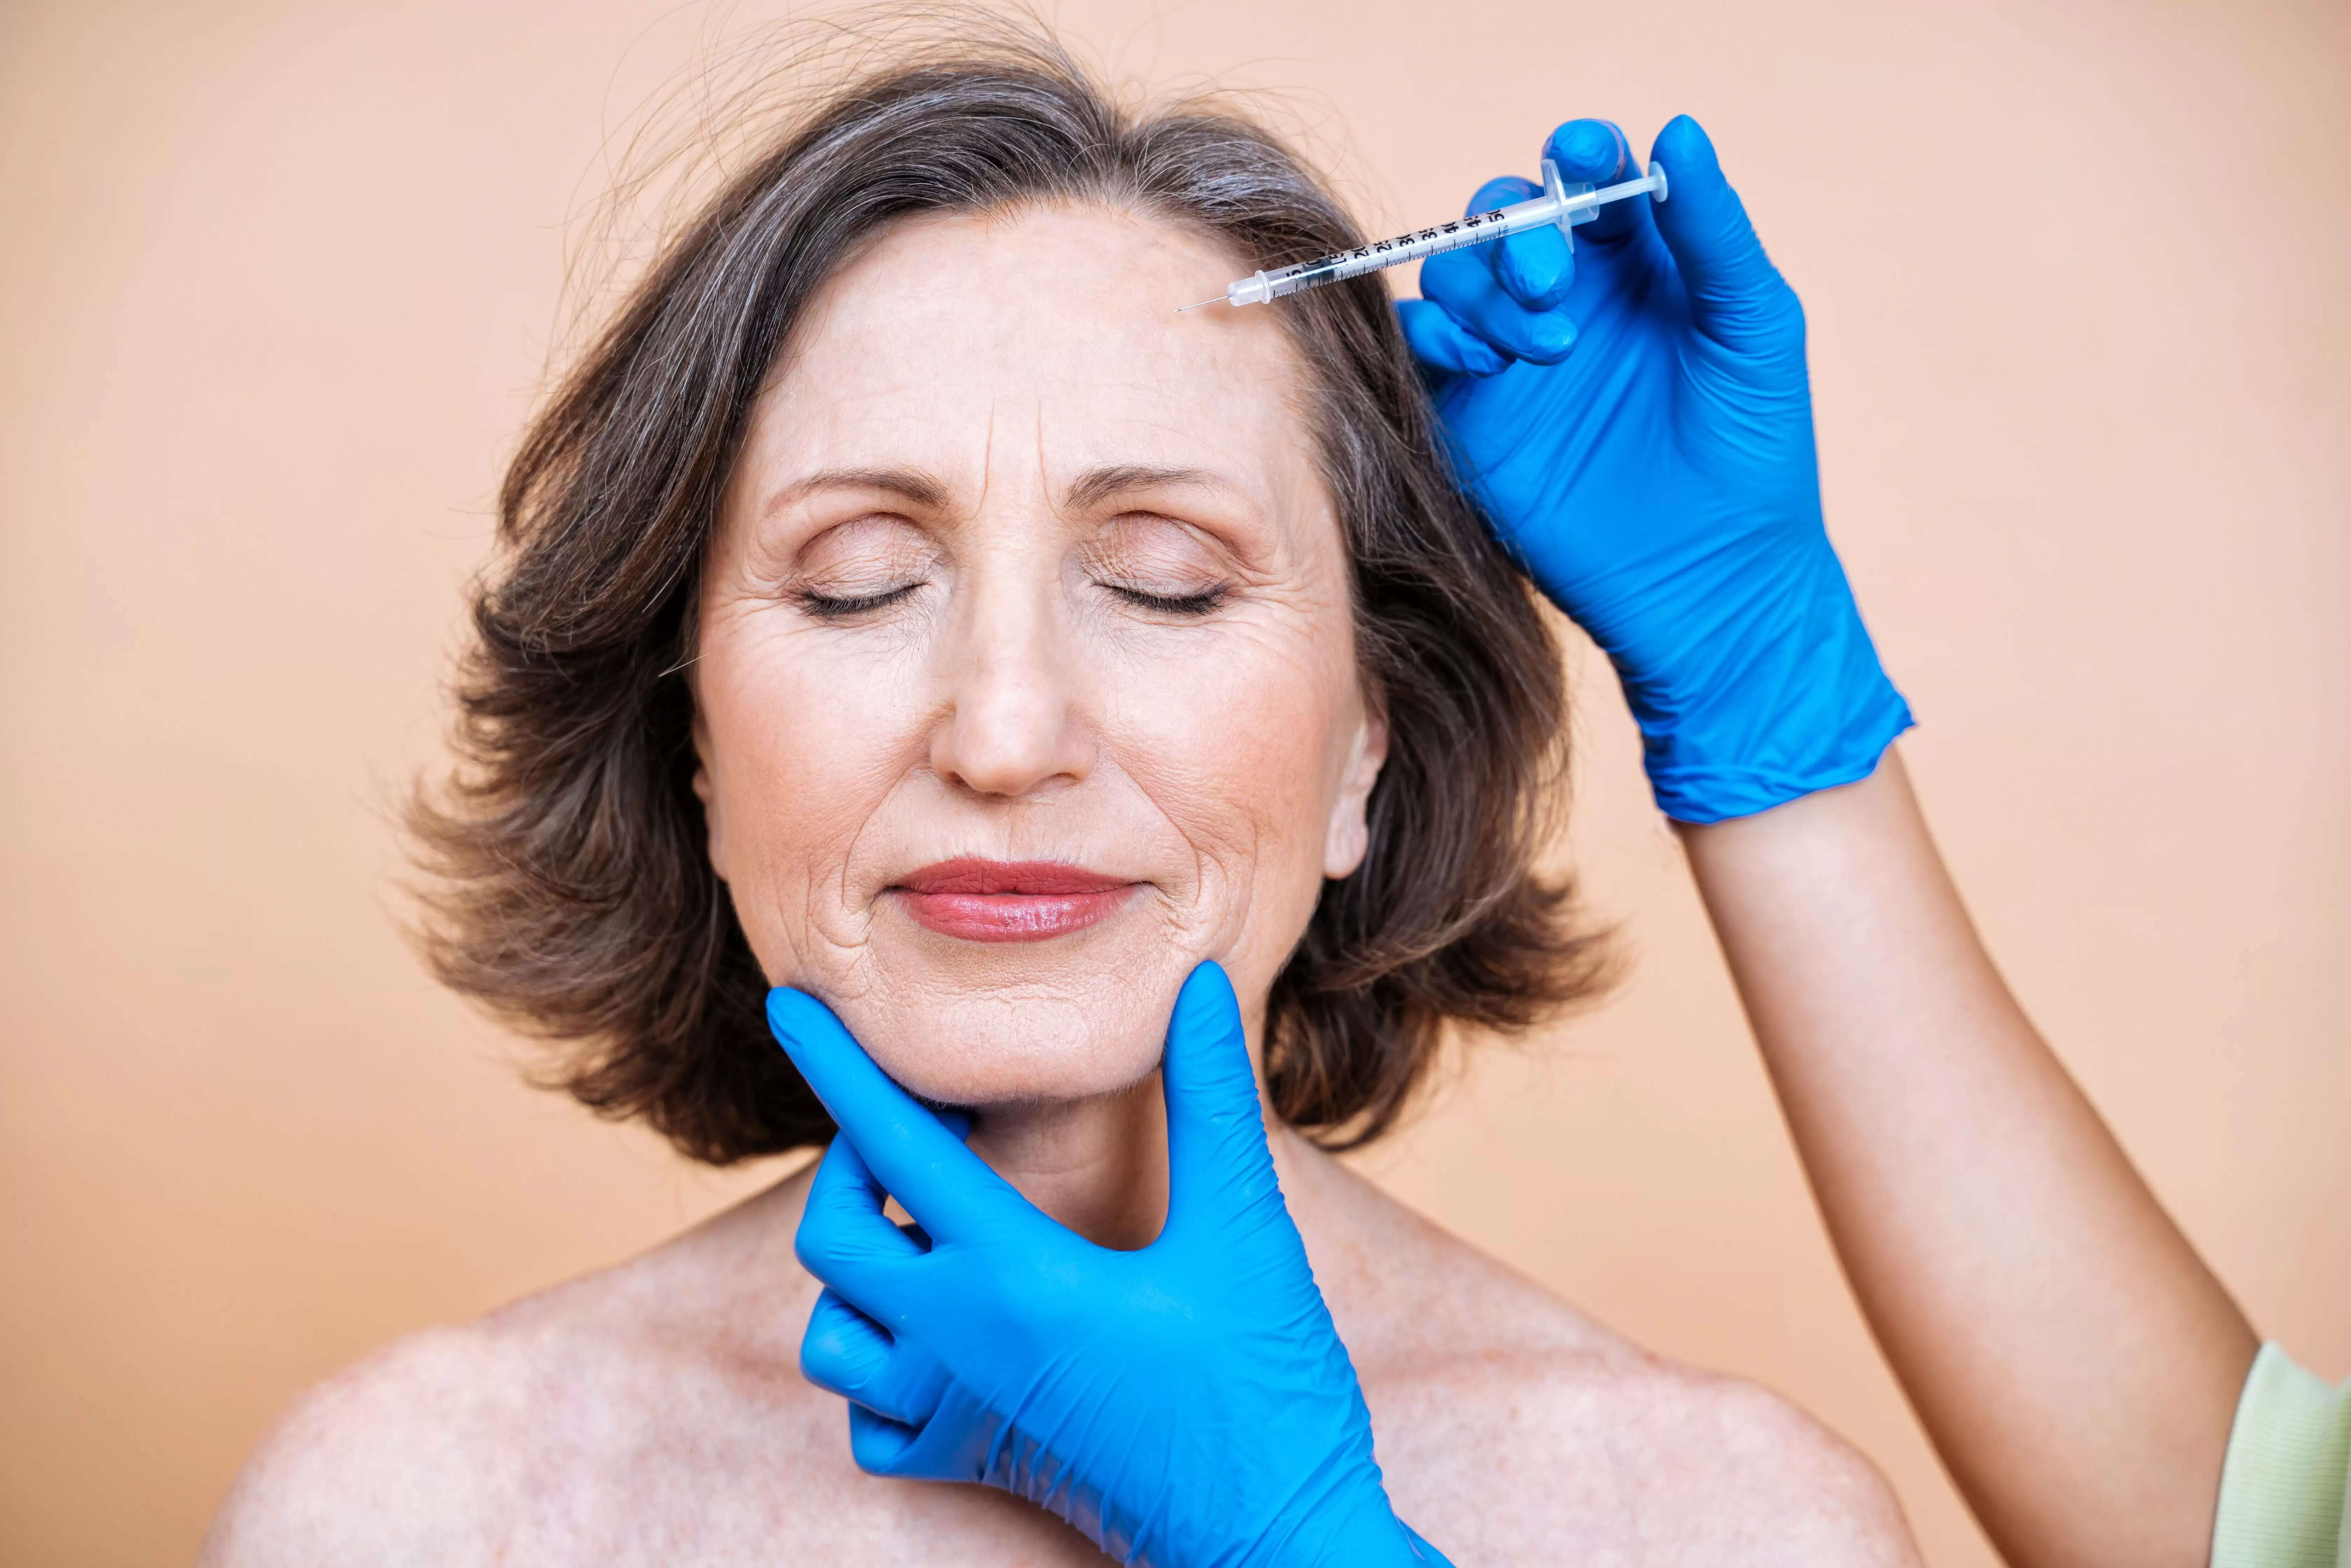 Questions to ask before you get Botox-ed